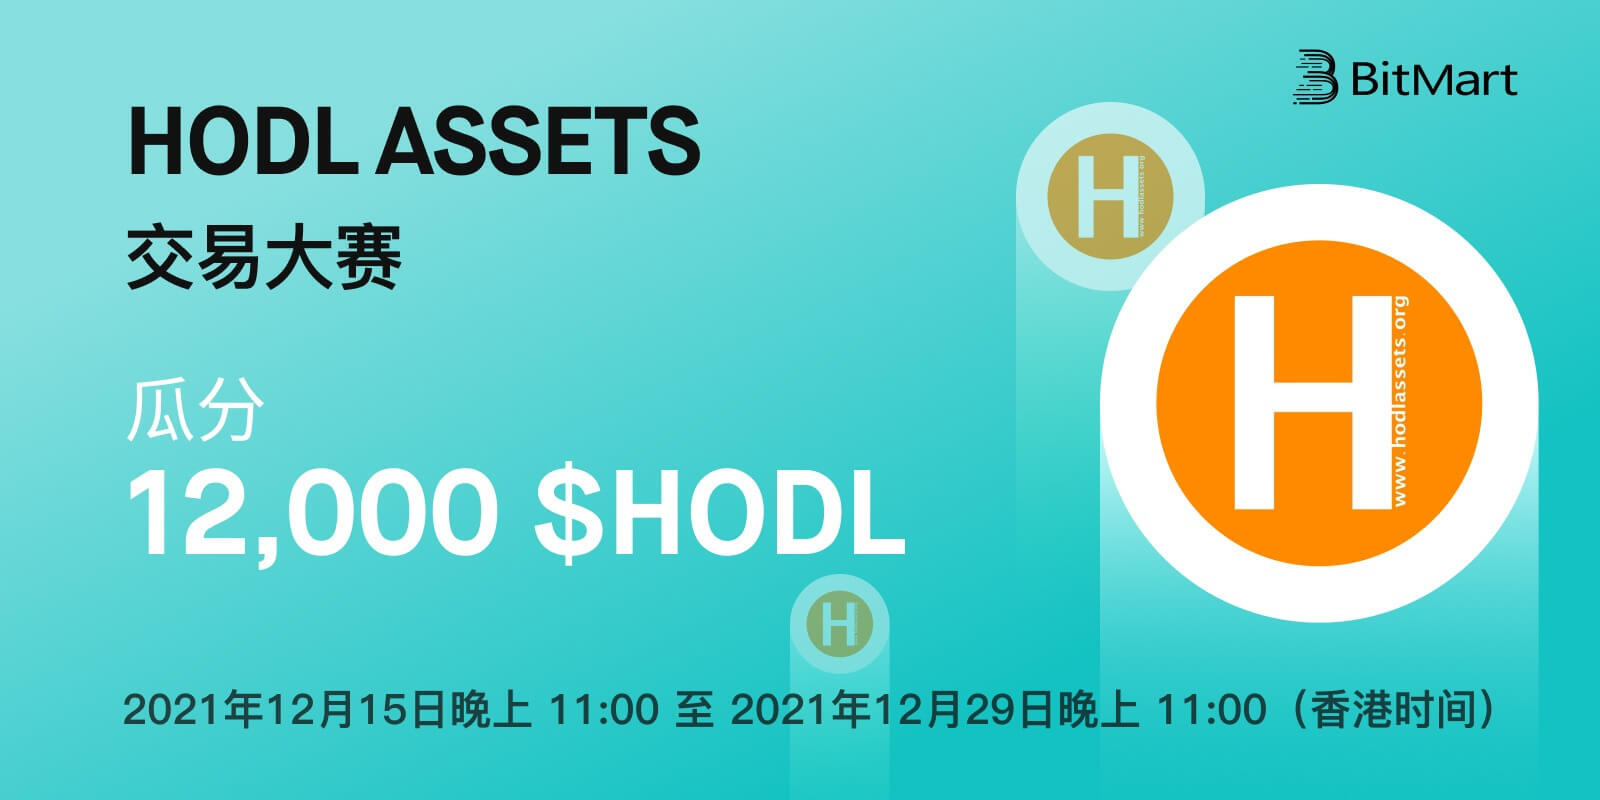 HODL-competition-cn_2x.jpg